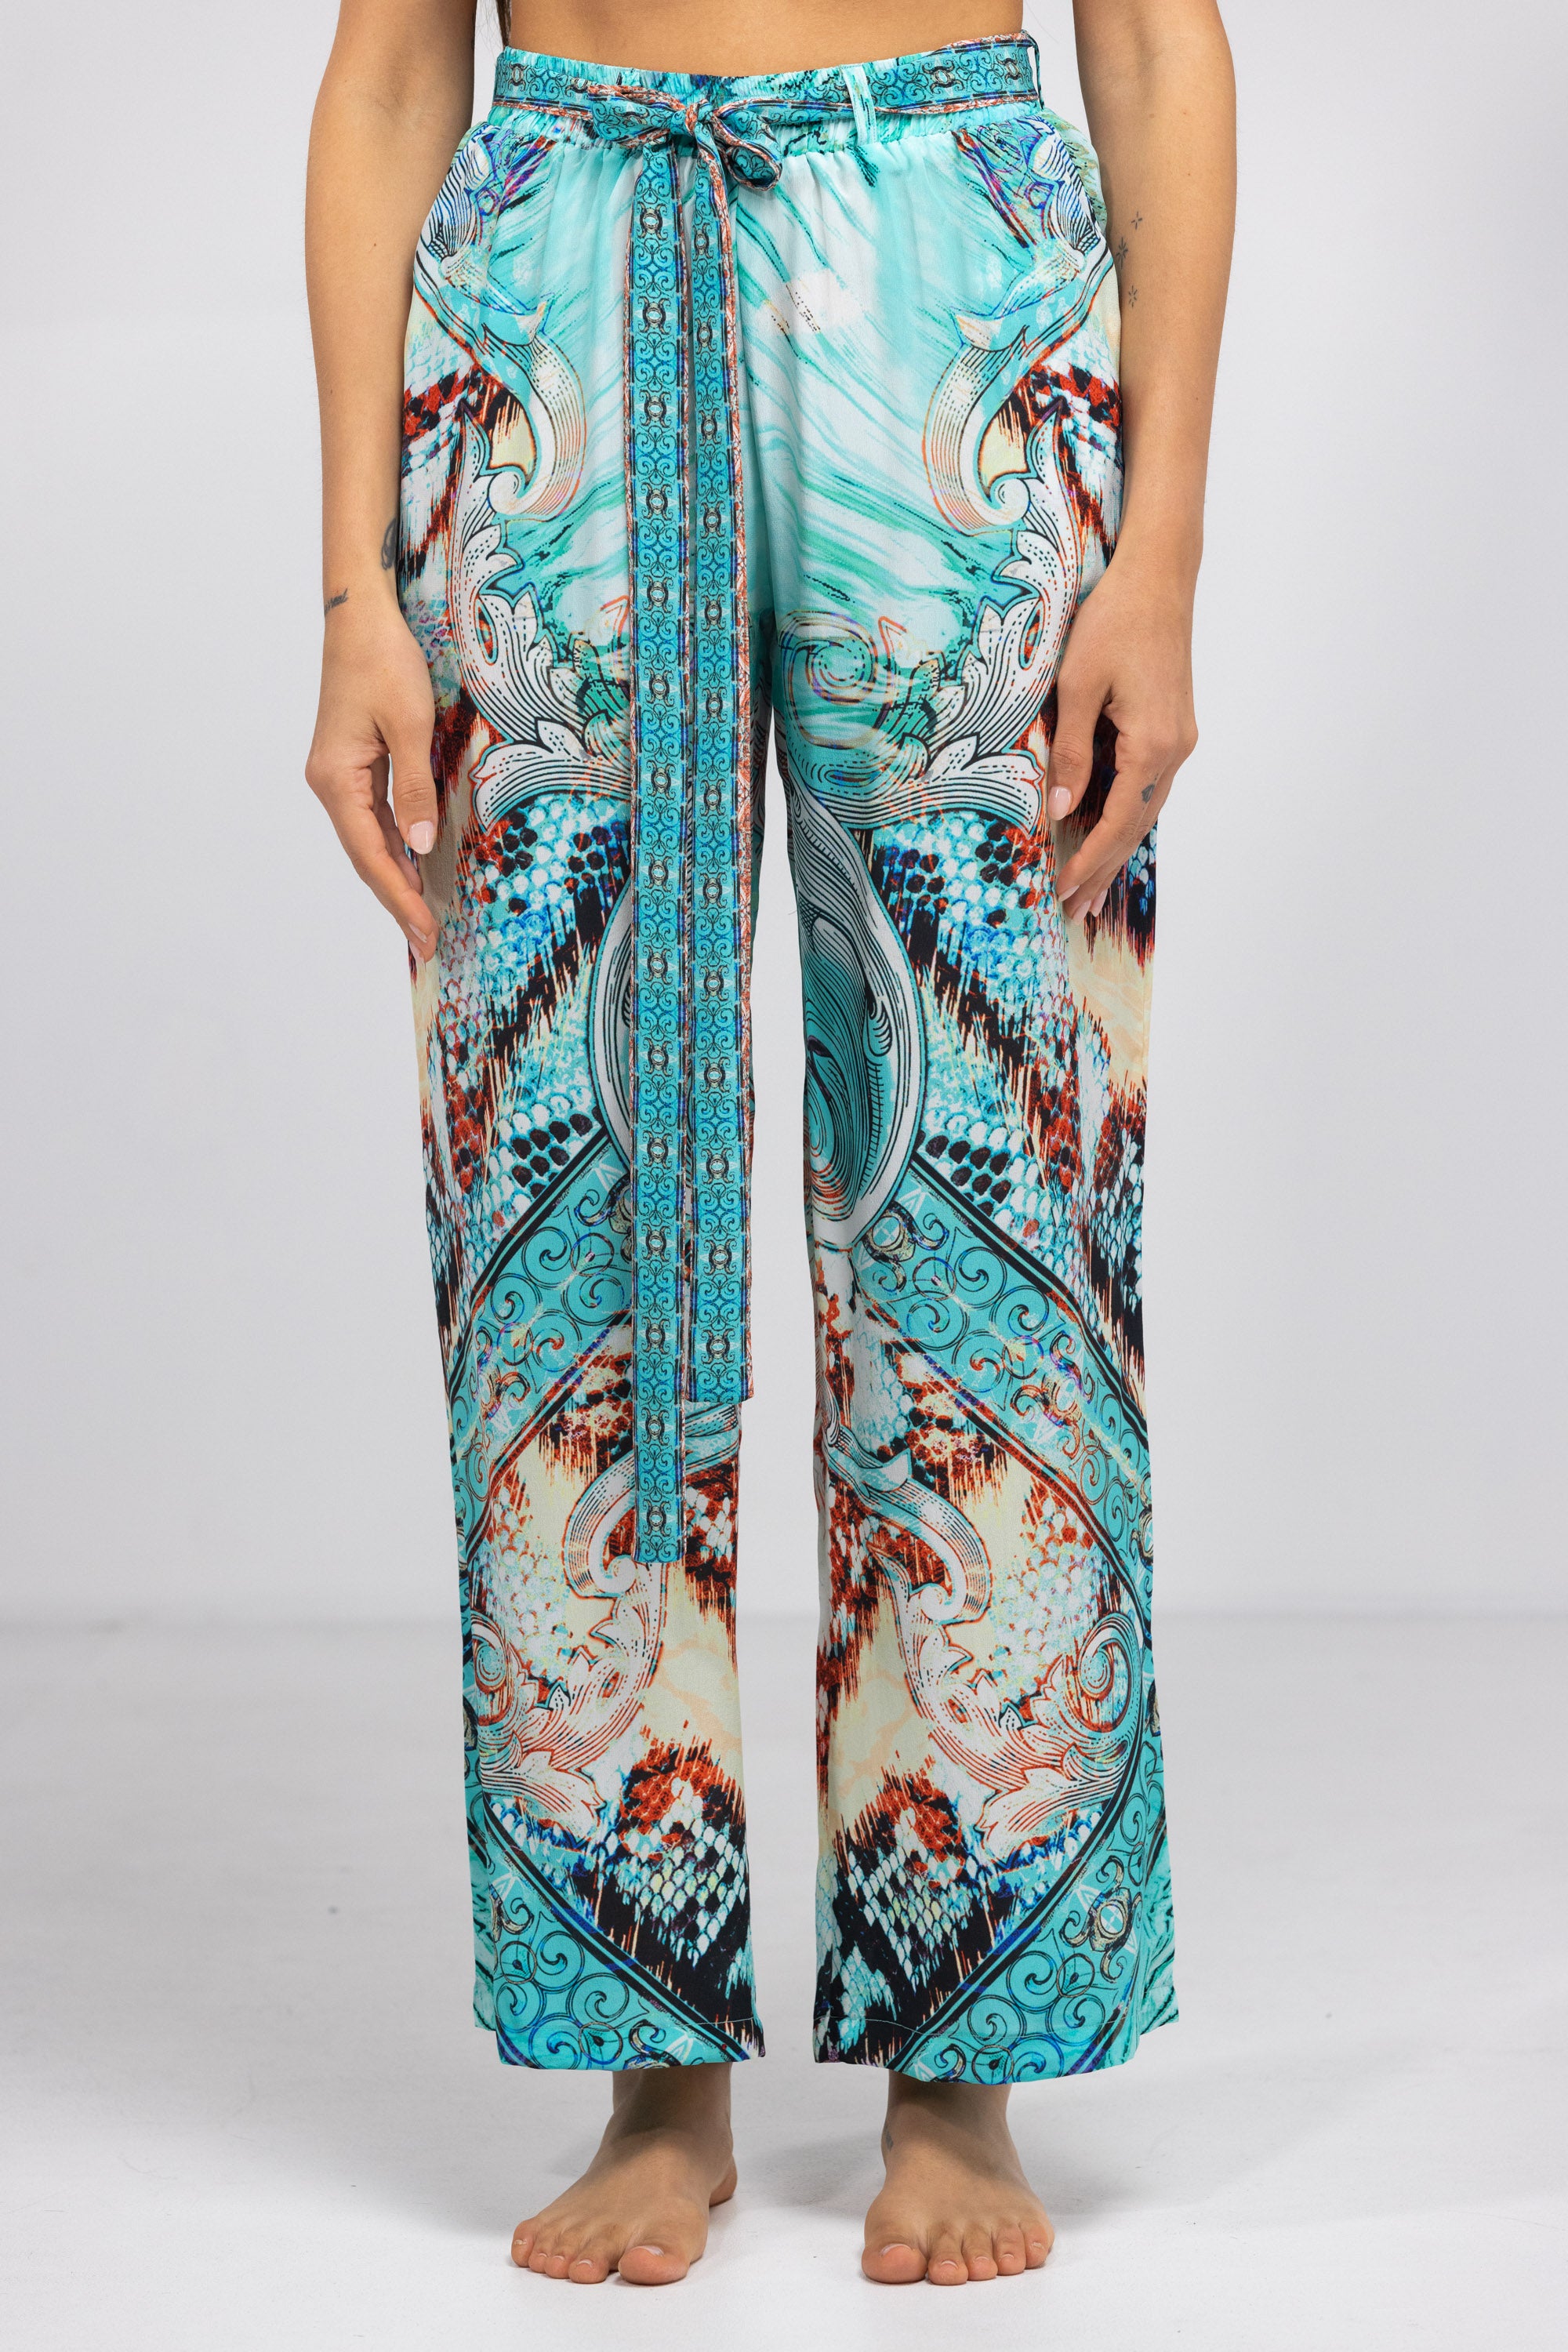 GOLDCOAST - SLOUCH TROUSER